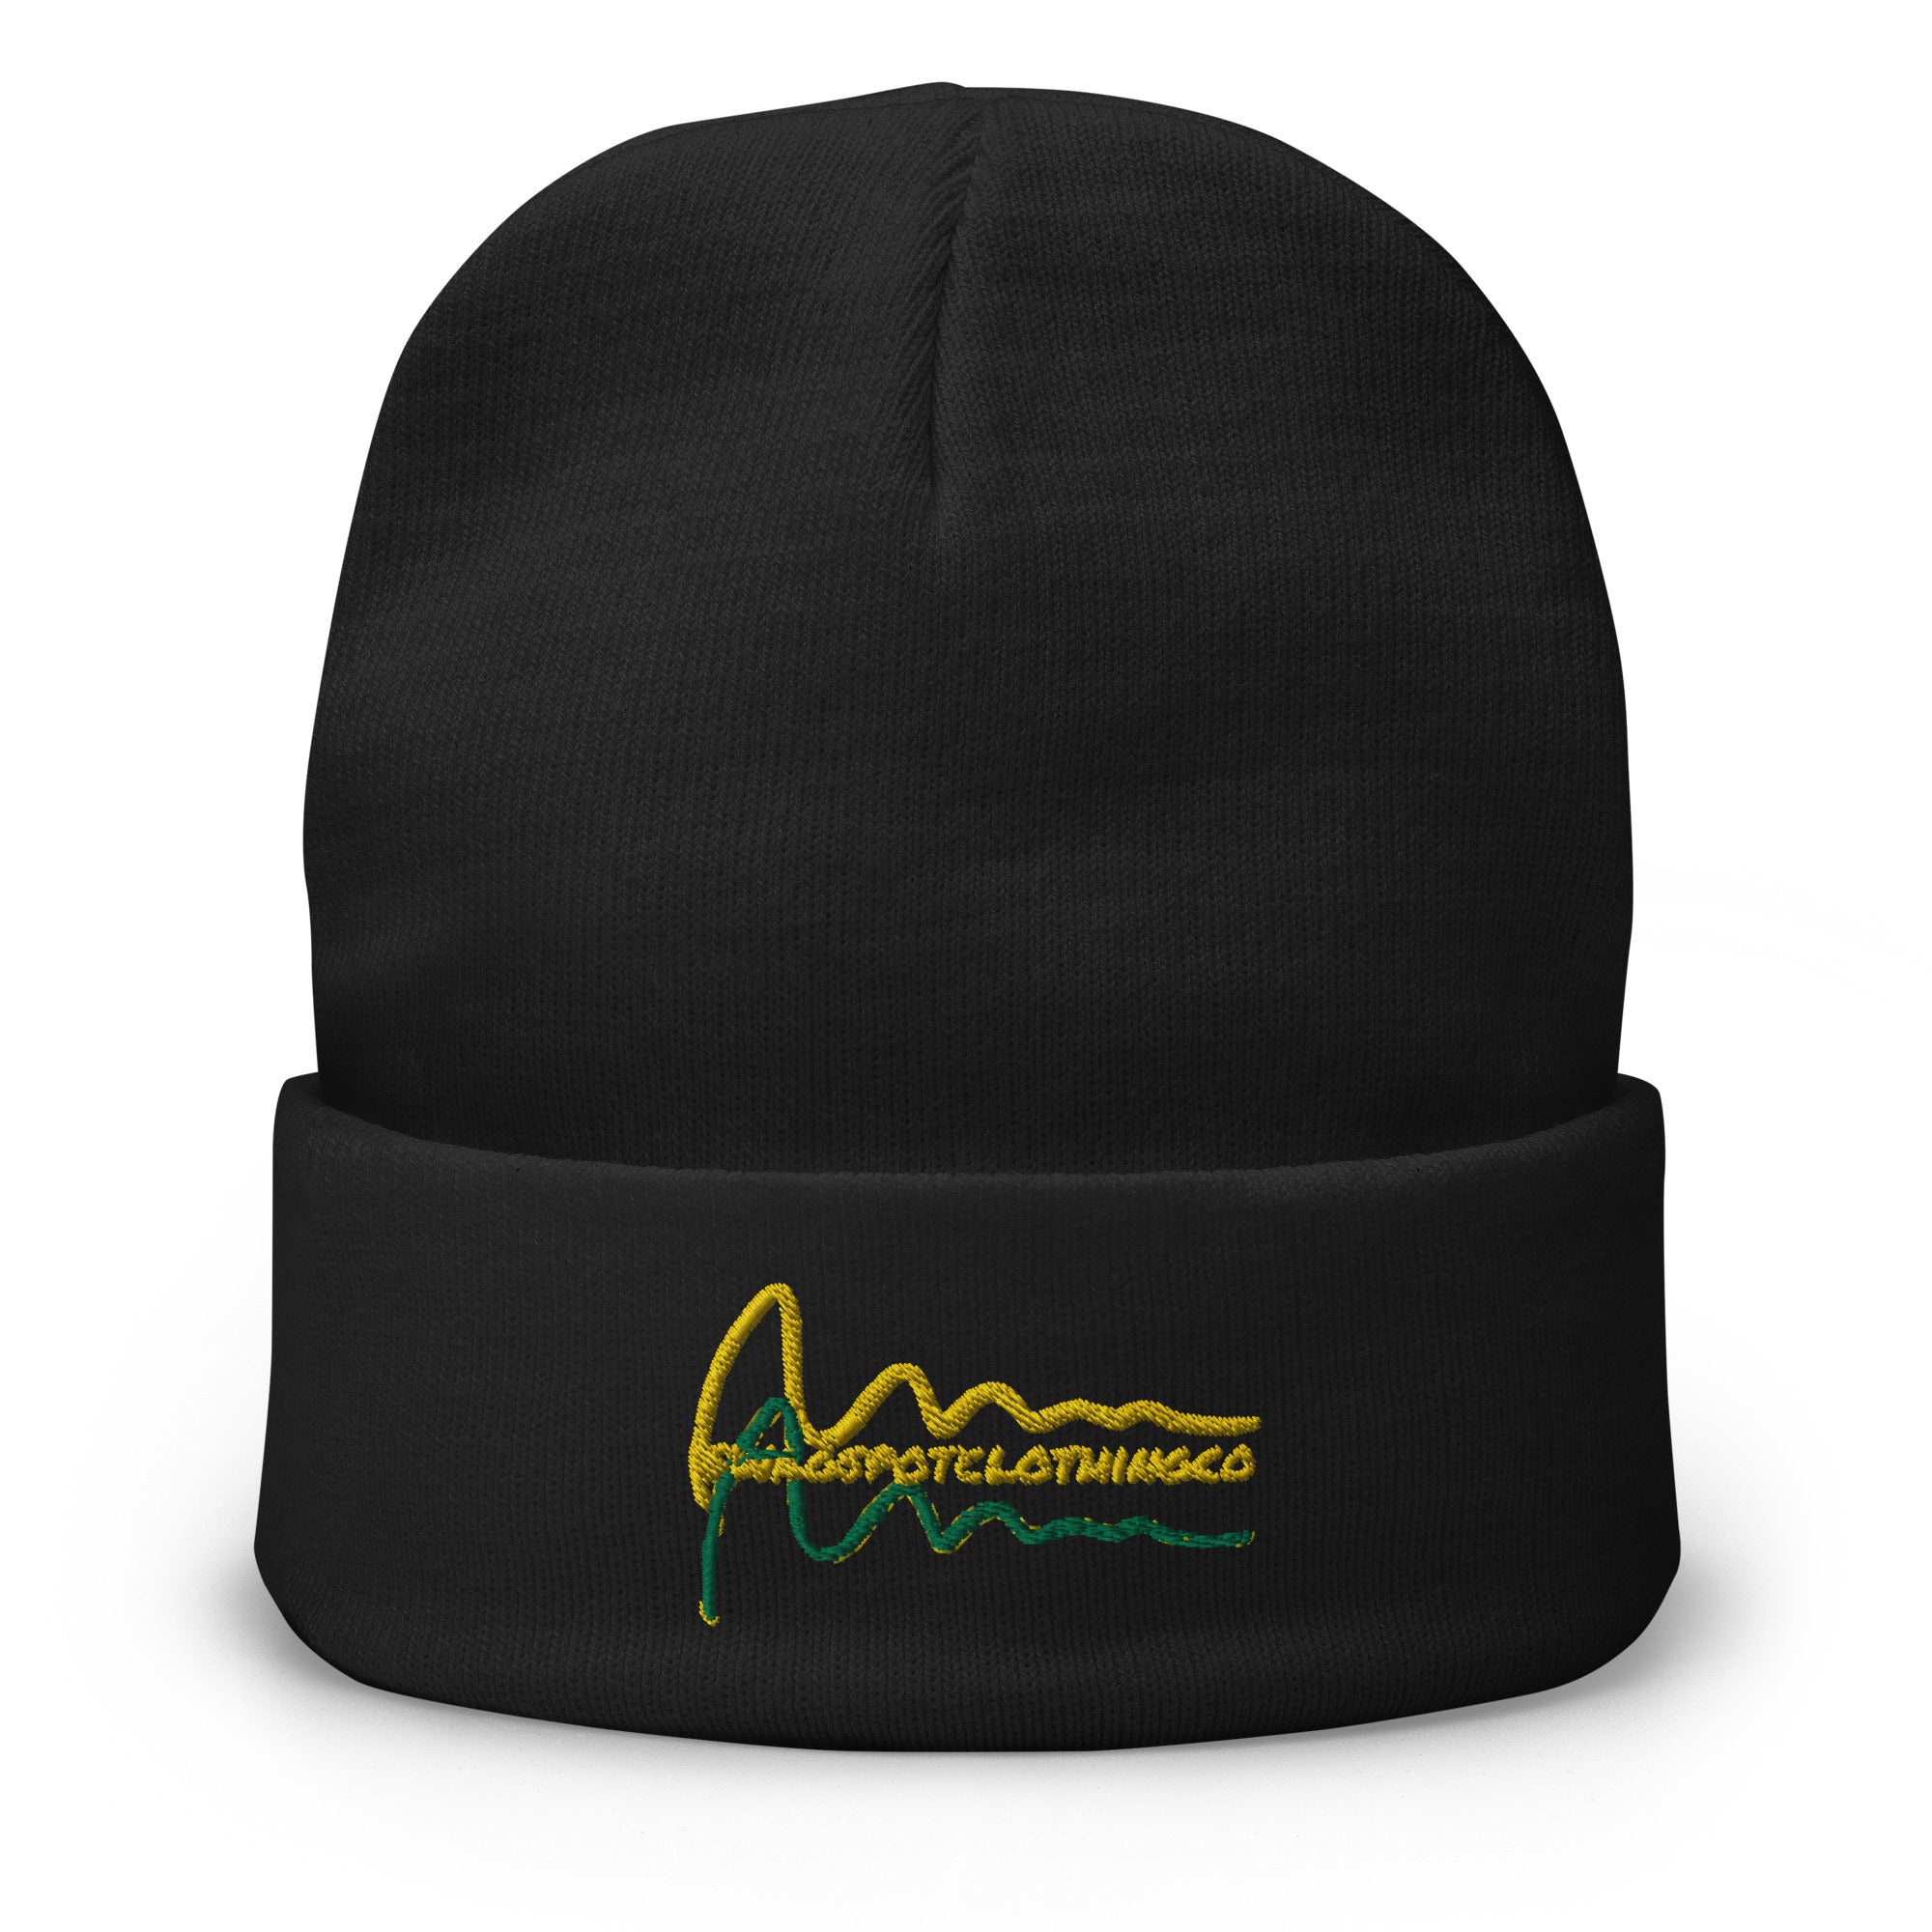 Swag Spot Clothing Co Signature Embroidered Beanie w/Green & Yellow Stitch - Swag Spot Clothing Co